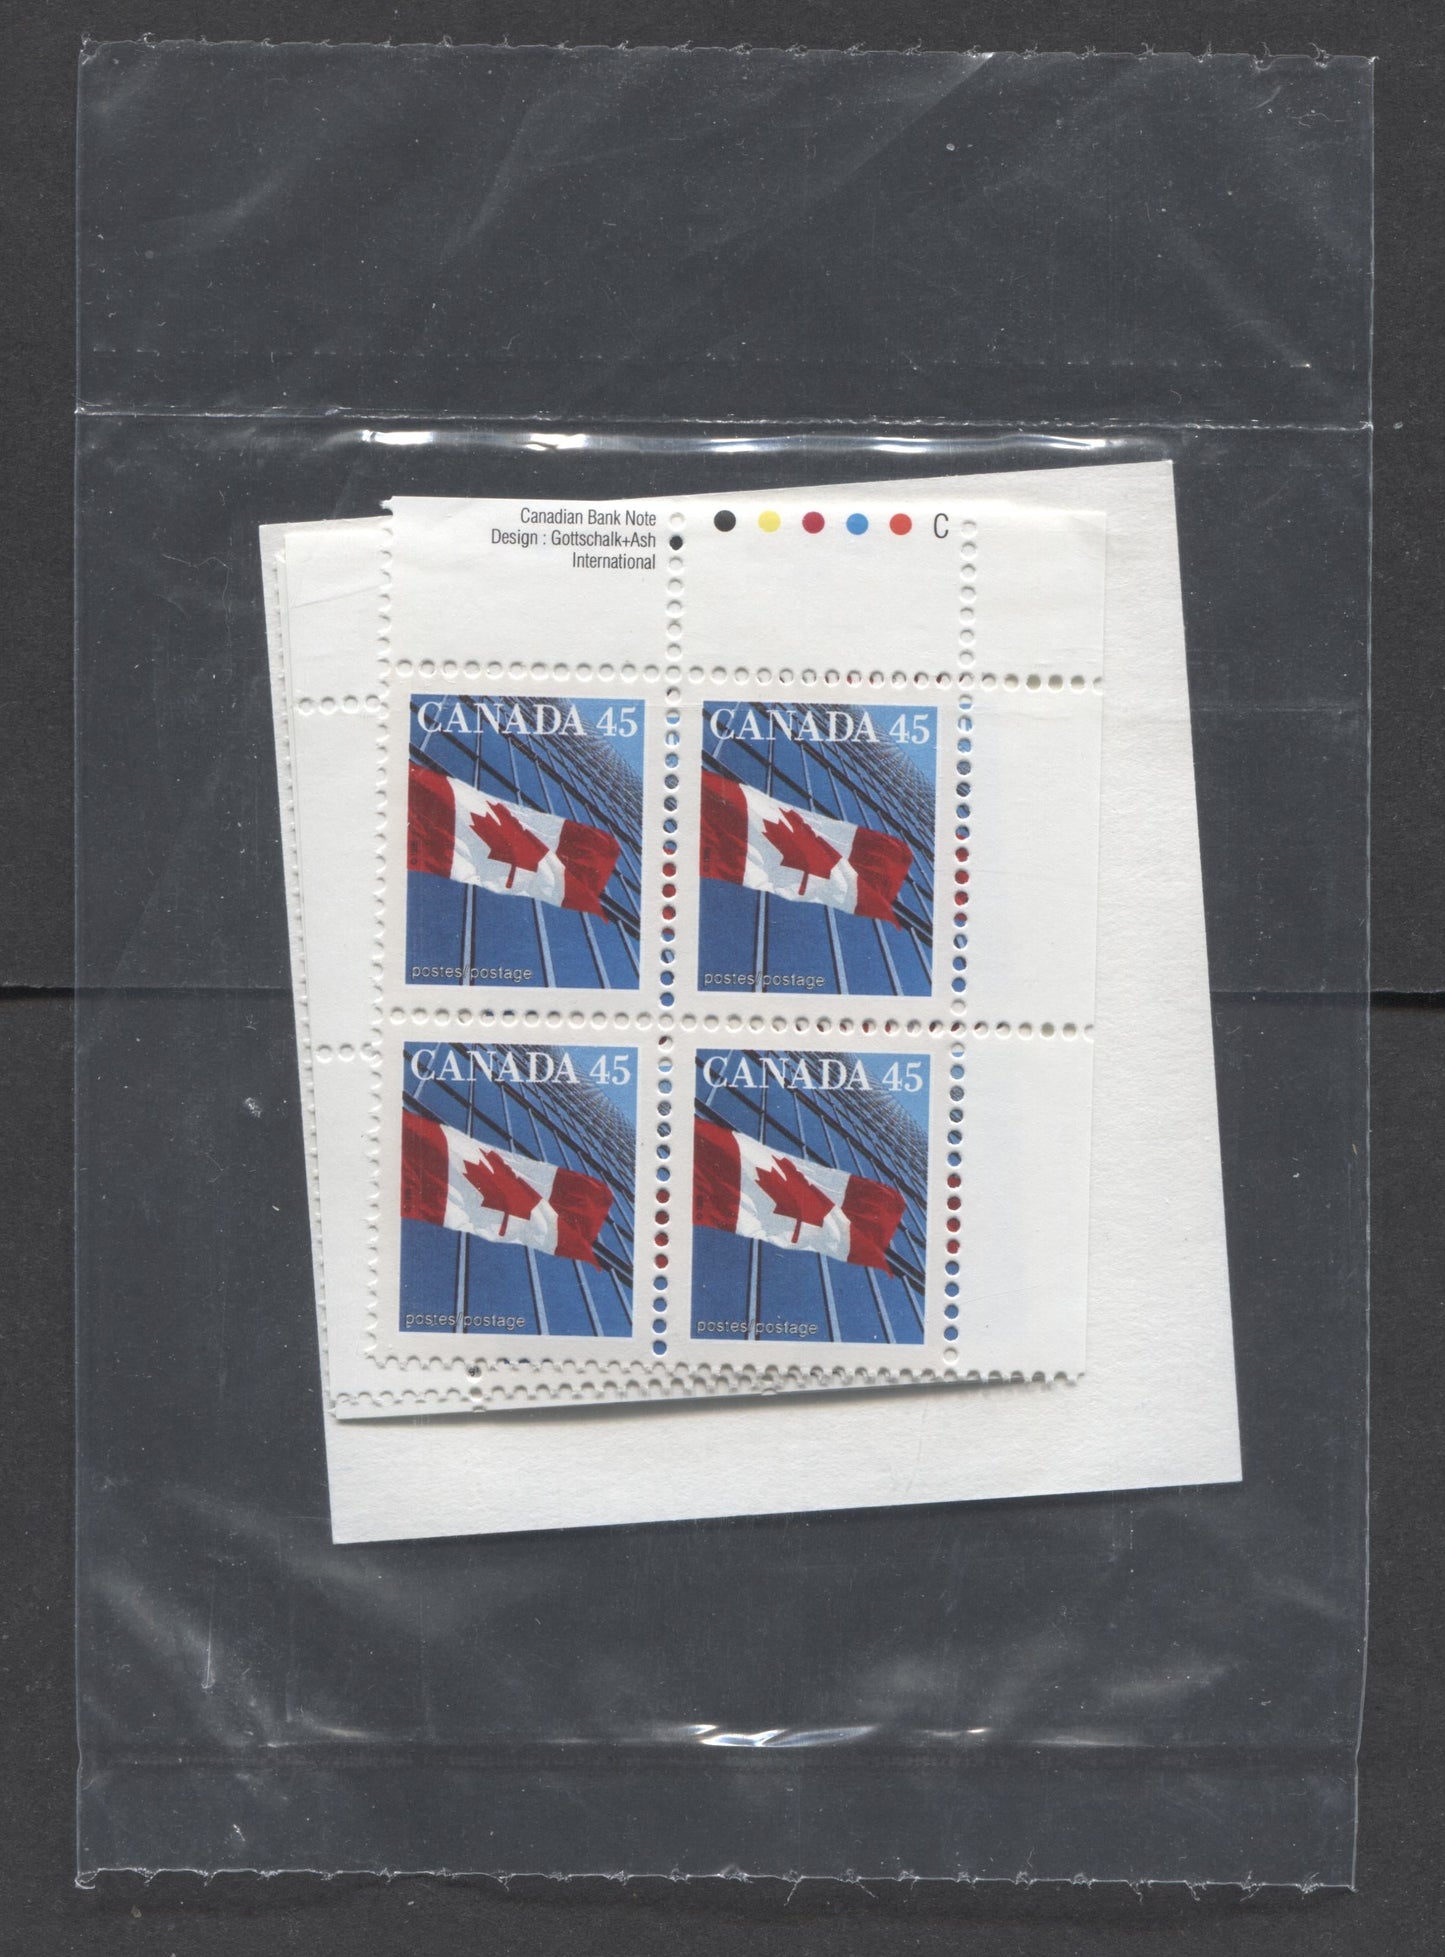 Lot 40 Canada #1362 45c Multicoloured 1998 Domestic First-Class Rate Issue, Canada Post Sealed Pack of Inscription Blocks, CBN Printing On DF CPP Paper, With HB Type 6A Insert Card, VFNH, Unitrade Cat. $18